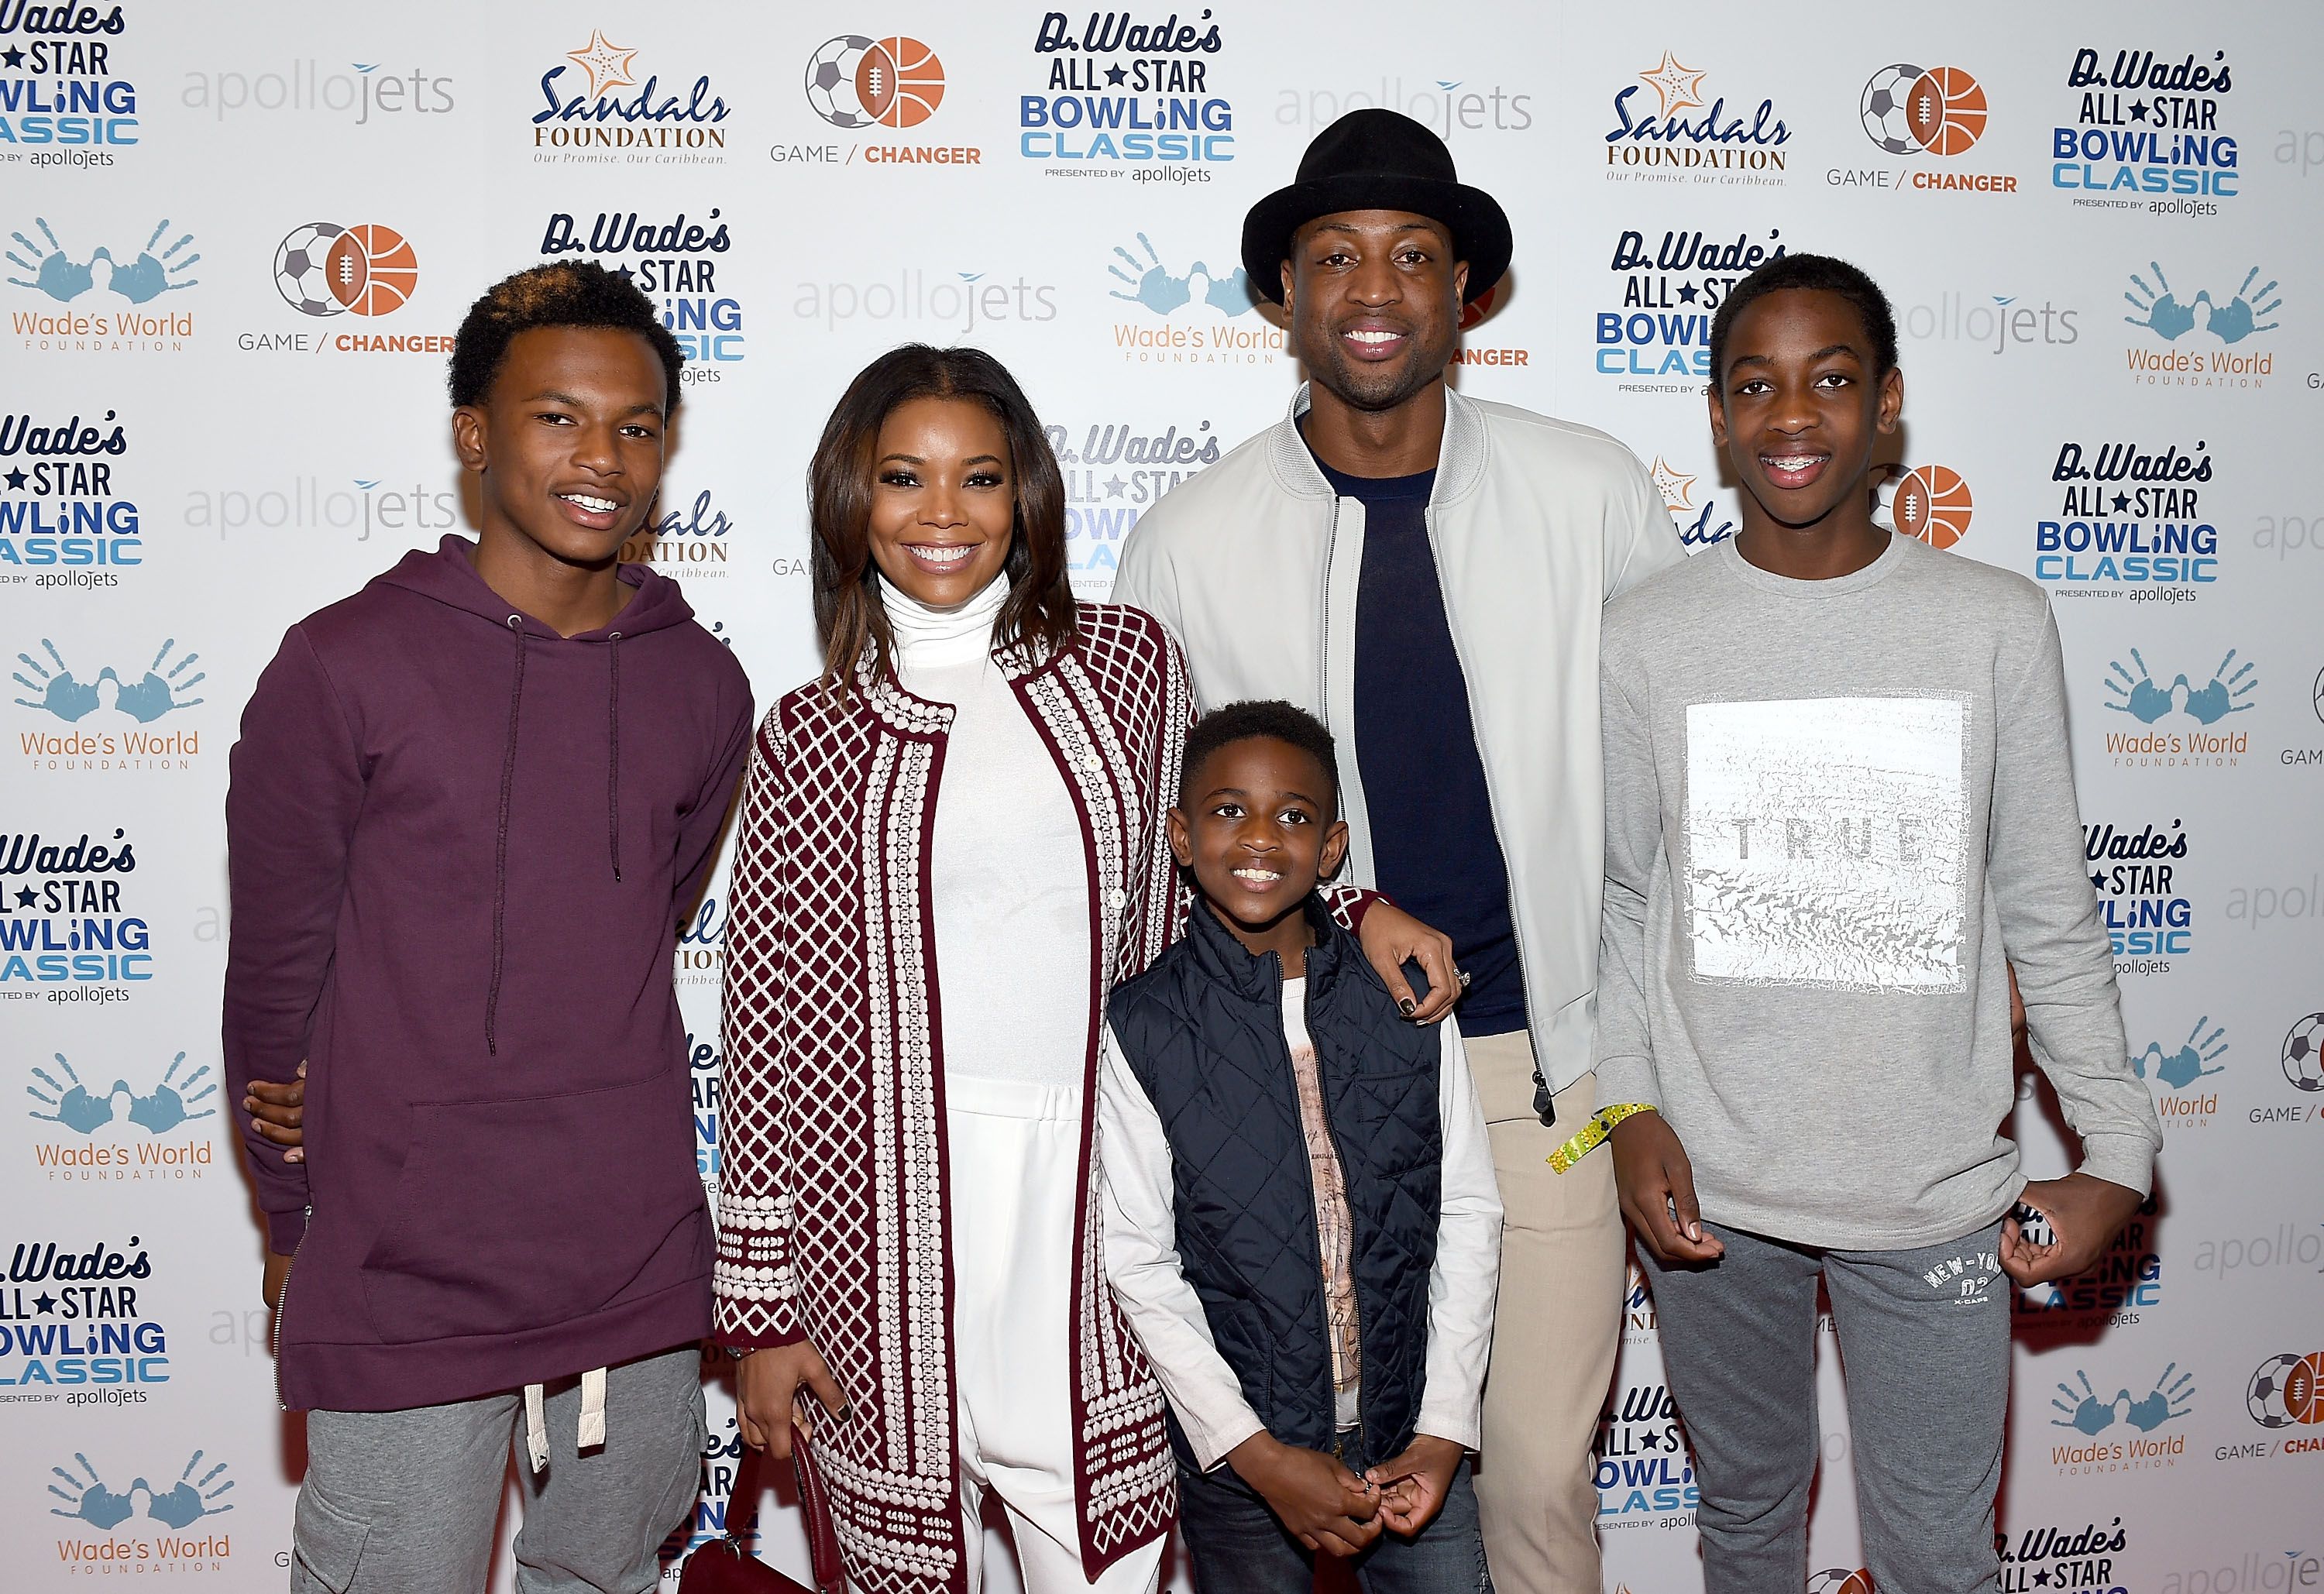 Dahveon Morris, Gabrielle Union, Zion Wade, Dwyane Wade, and Zaire Wade at the DWade All-Star Bowling Classic on February 13, 2016, in Toronto, Canada | Photo: George Pimentel/Getty Images